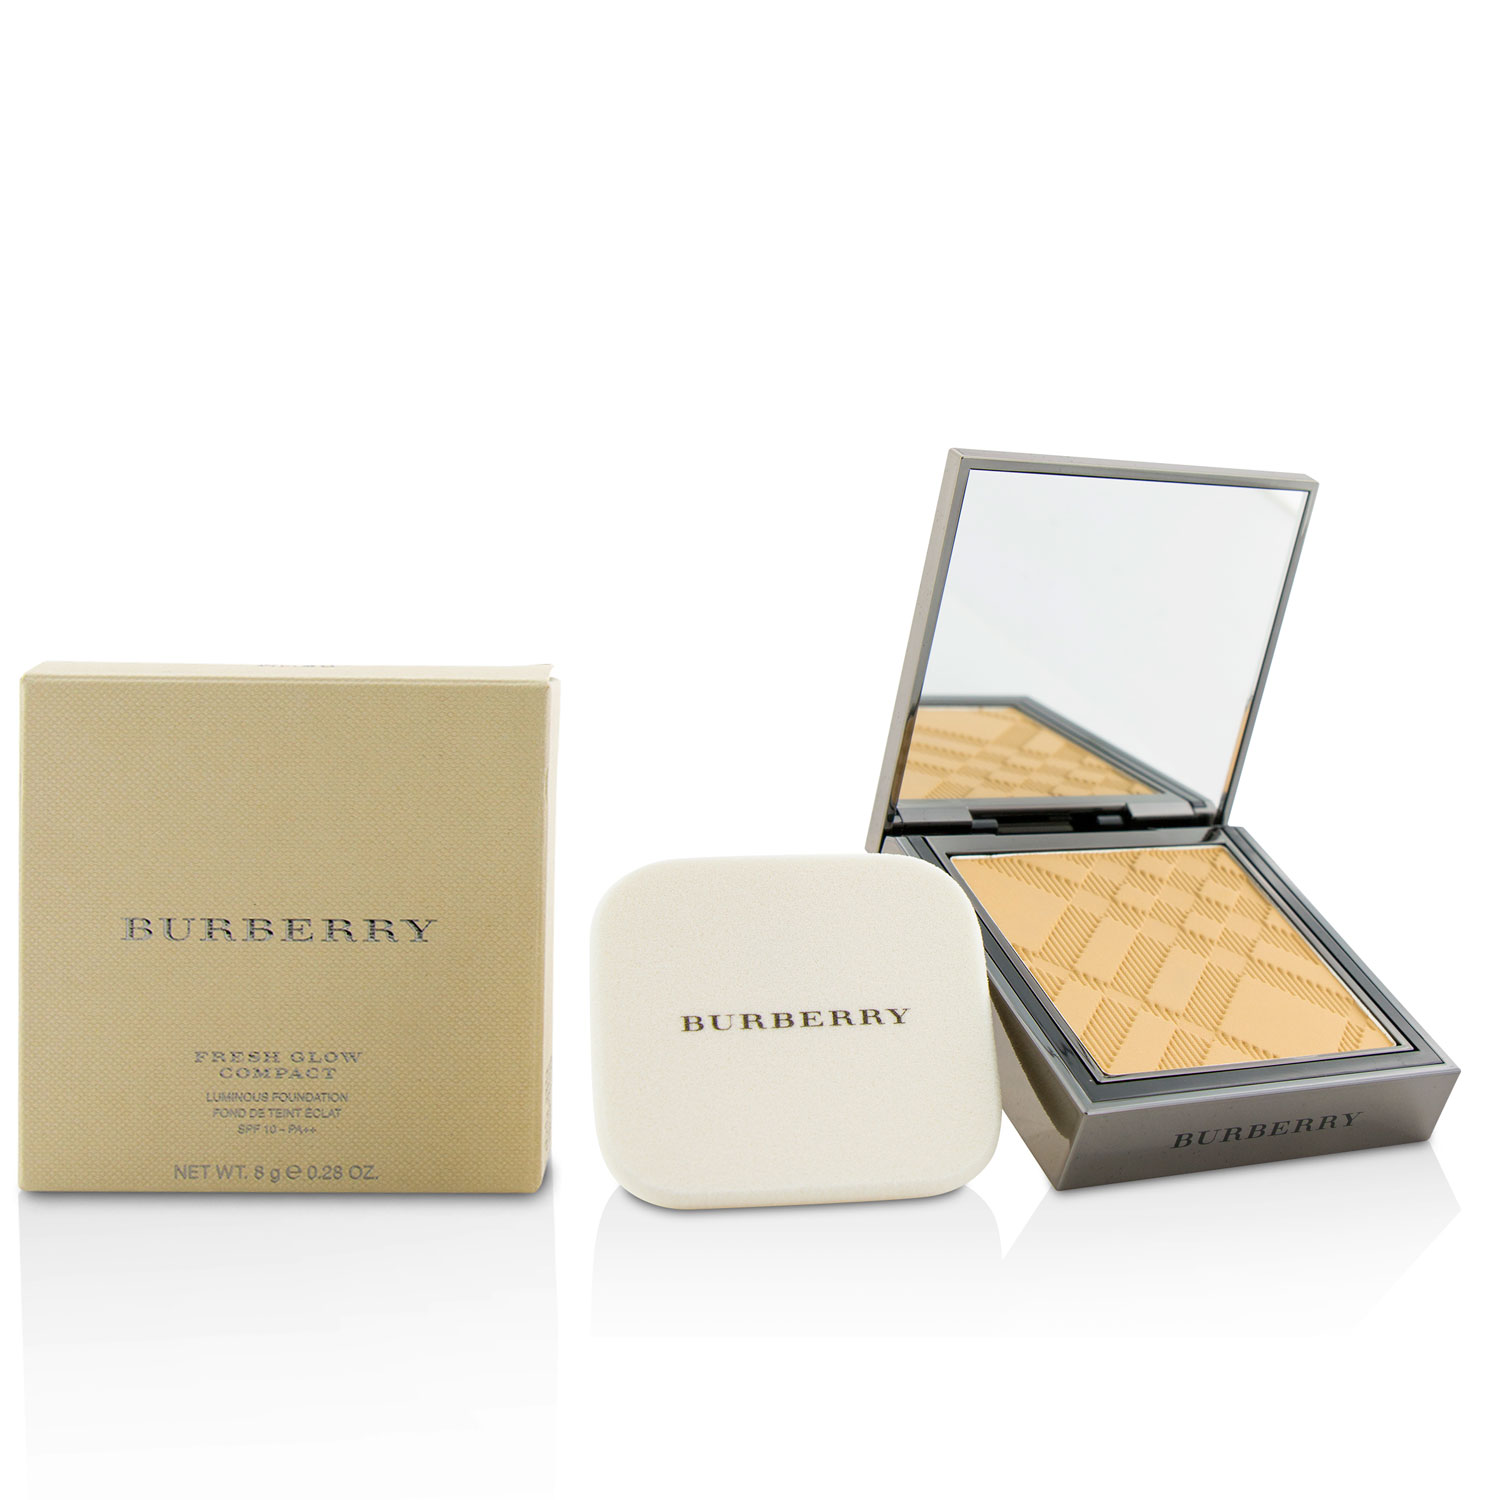 Fresh Glow Compact Luminous Foundation SPF 10 - # No. 31 Rosy Nude Burberry Image